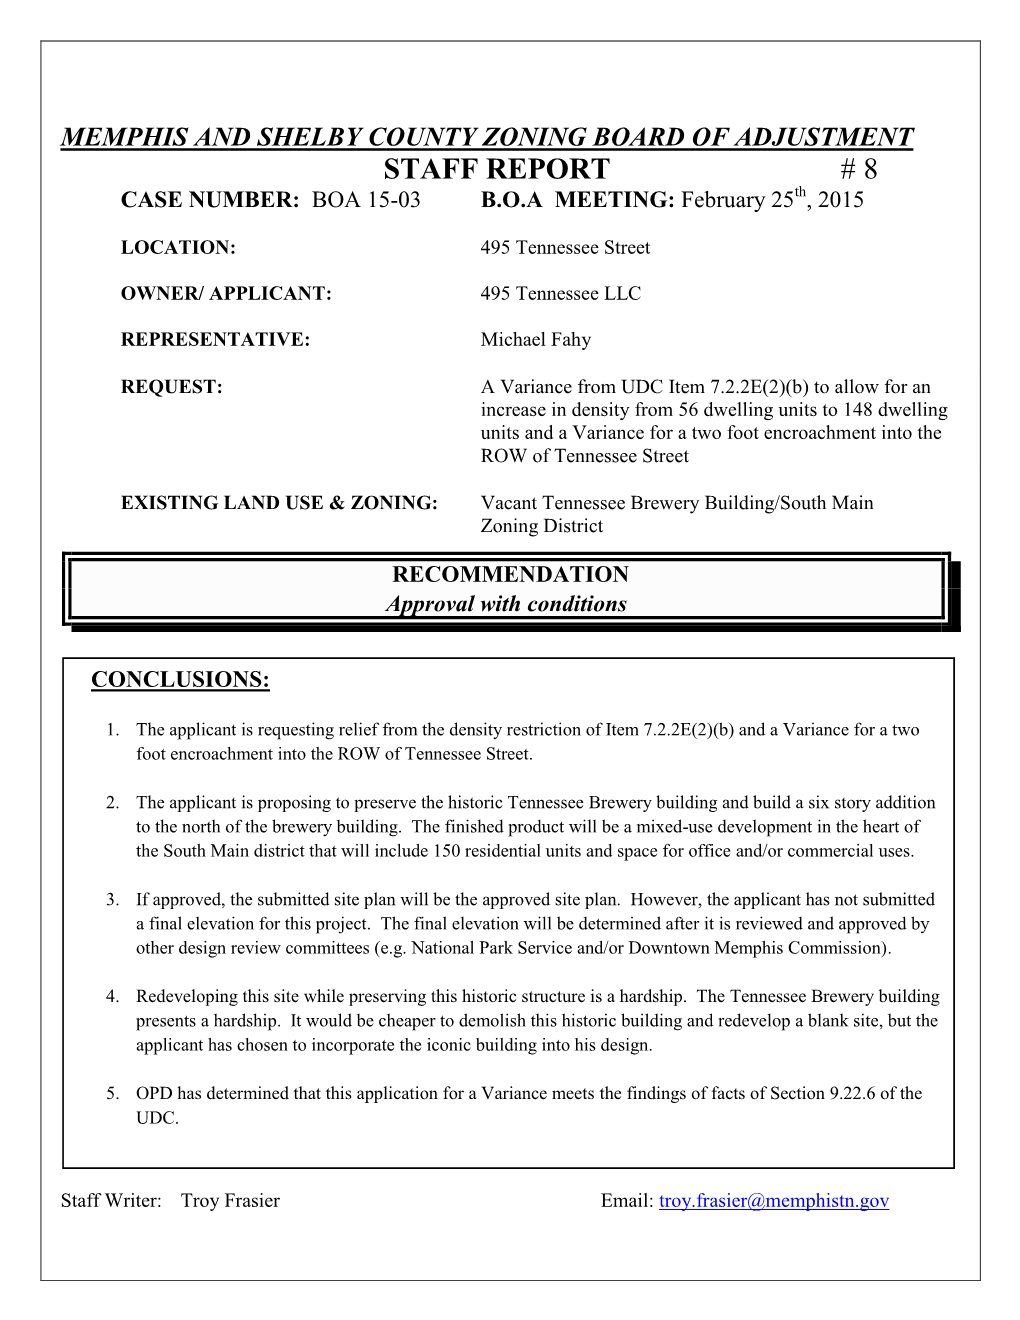 MEMPHIS and SHELBY COUNTY ZONING BOARD of ADJUSTMENT STAFF REPORT # 8 CASE NUMBER: BOA 15-03 B.O.A MEETING: February 25Th, 2015